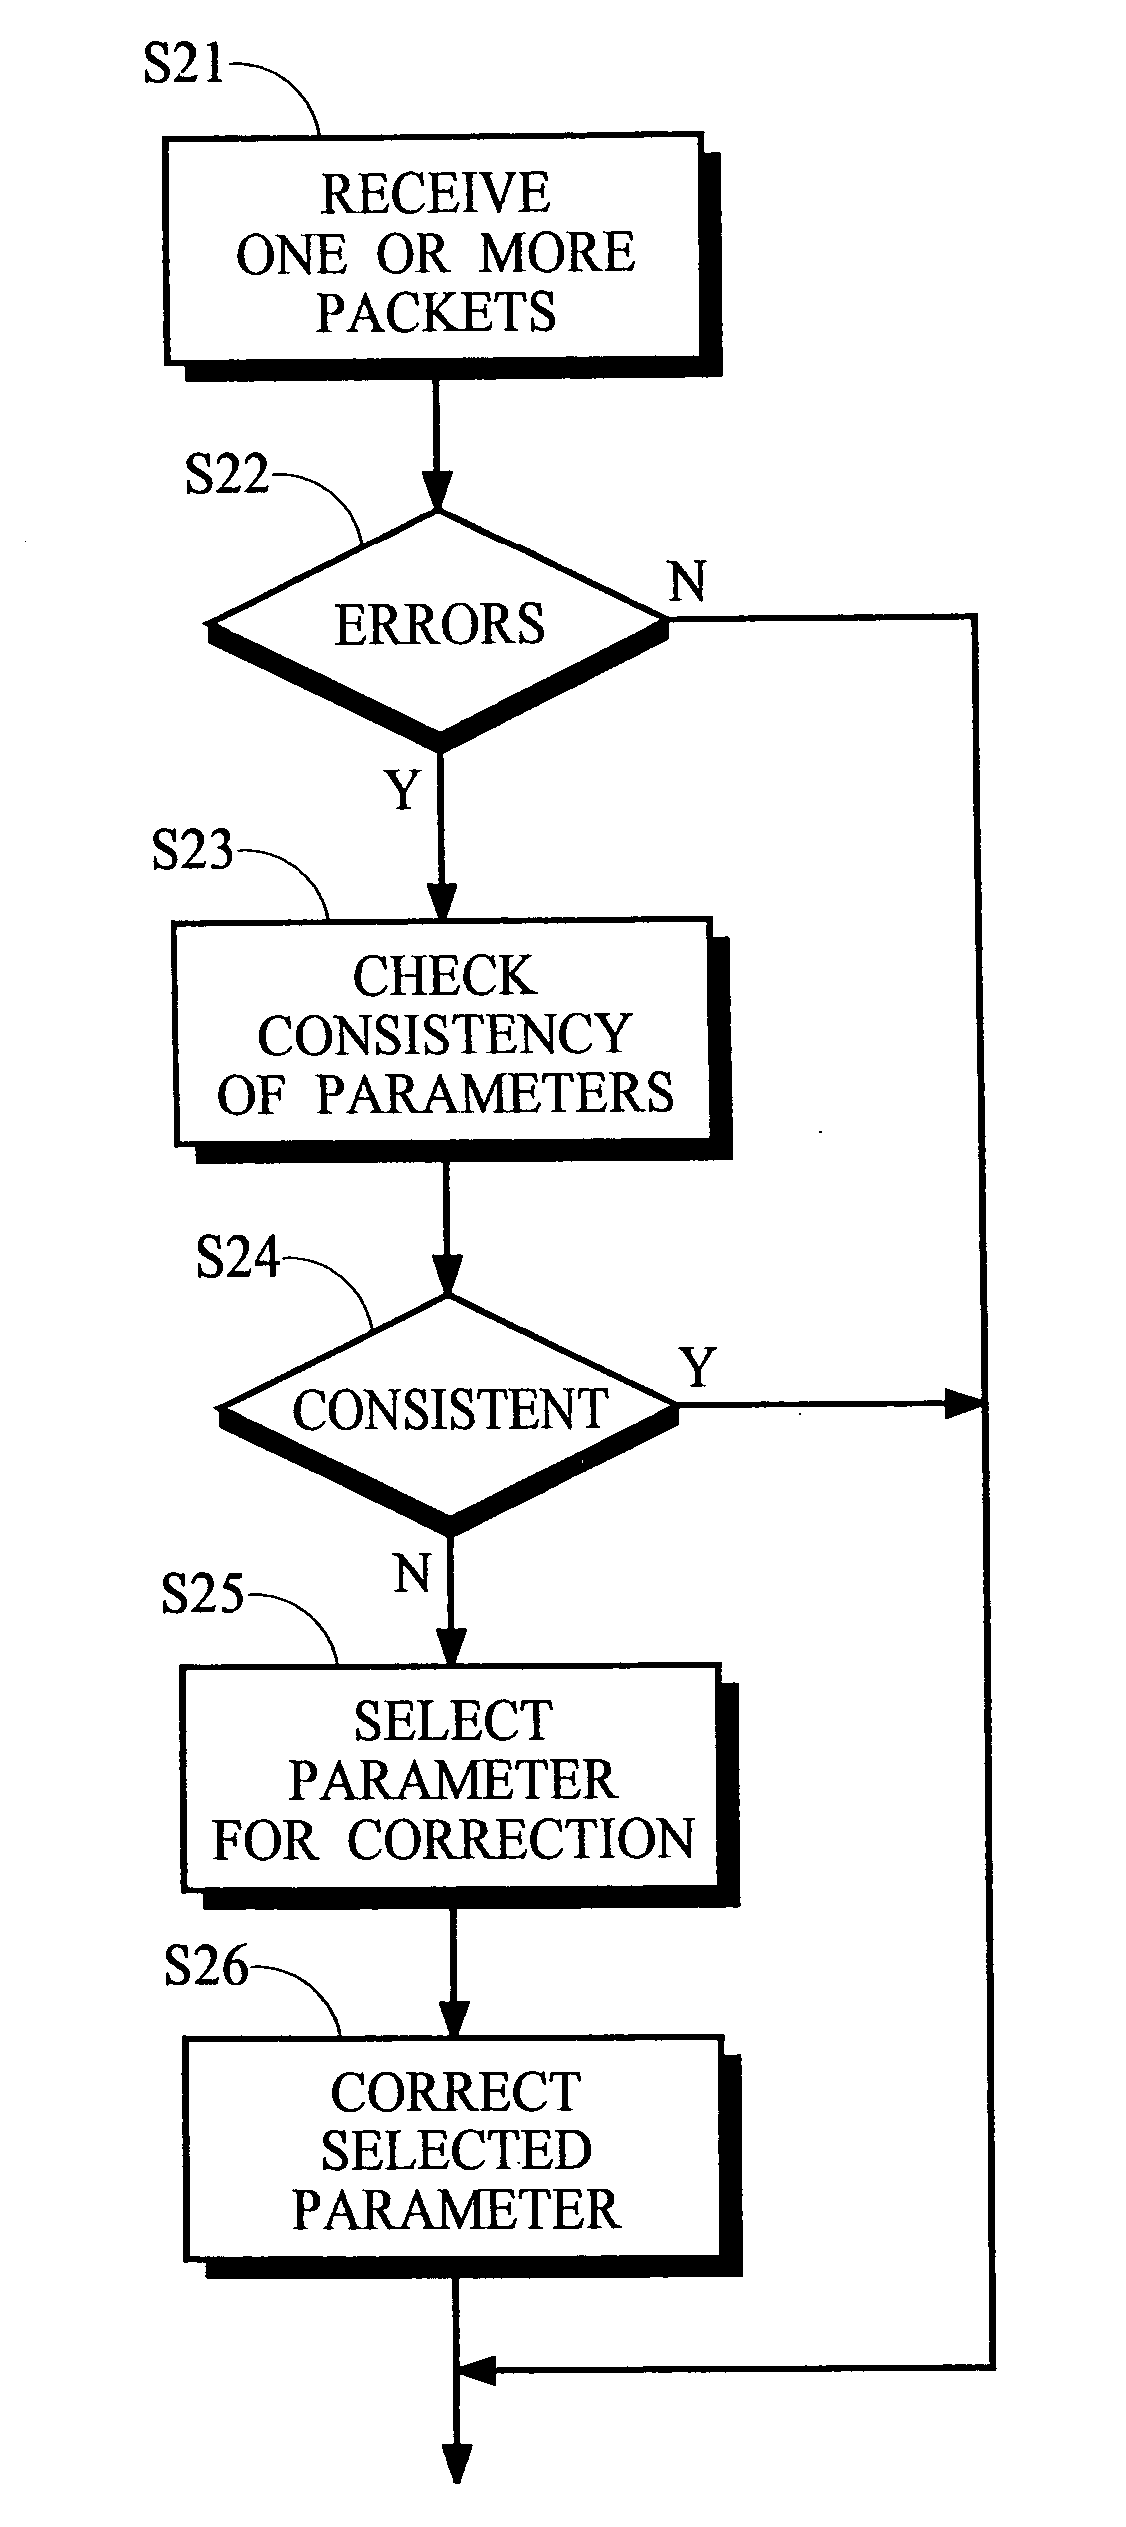 Error correction in packet-based communication networks using data consistency checks